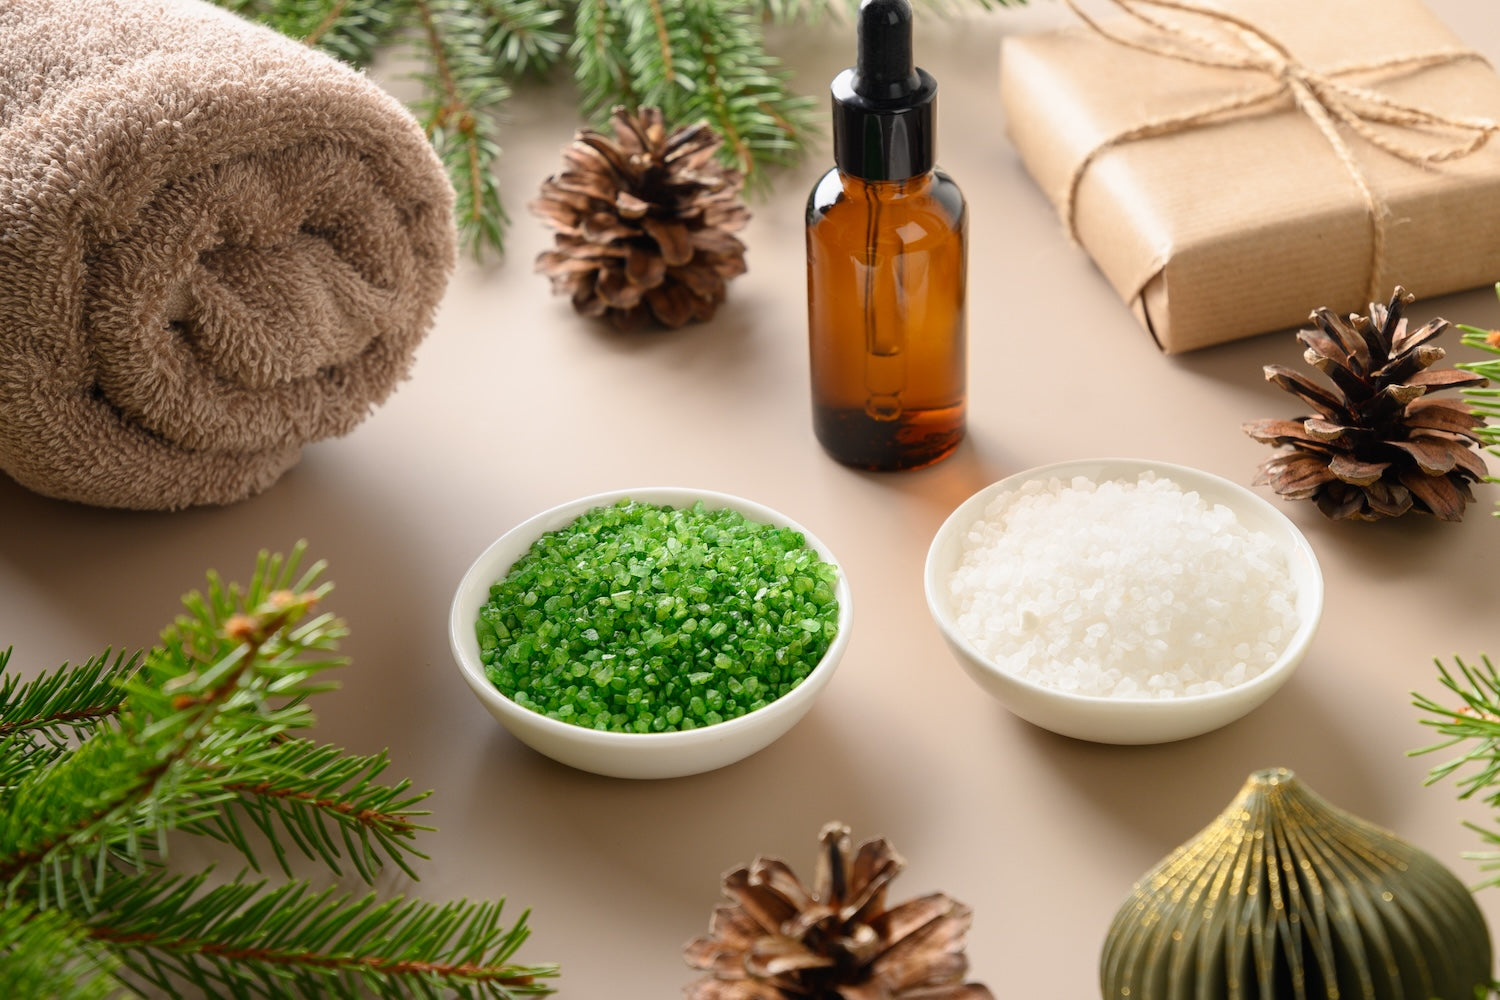 christmas-spa-concept-with-gift-wellness-objects-2022-11-16-09-53-08-utc.jpg